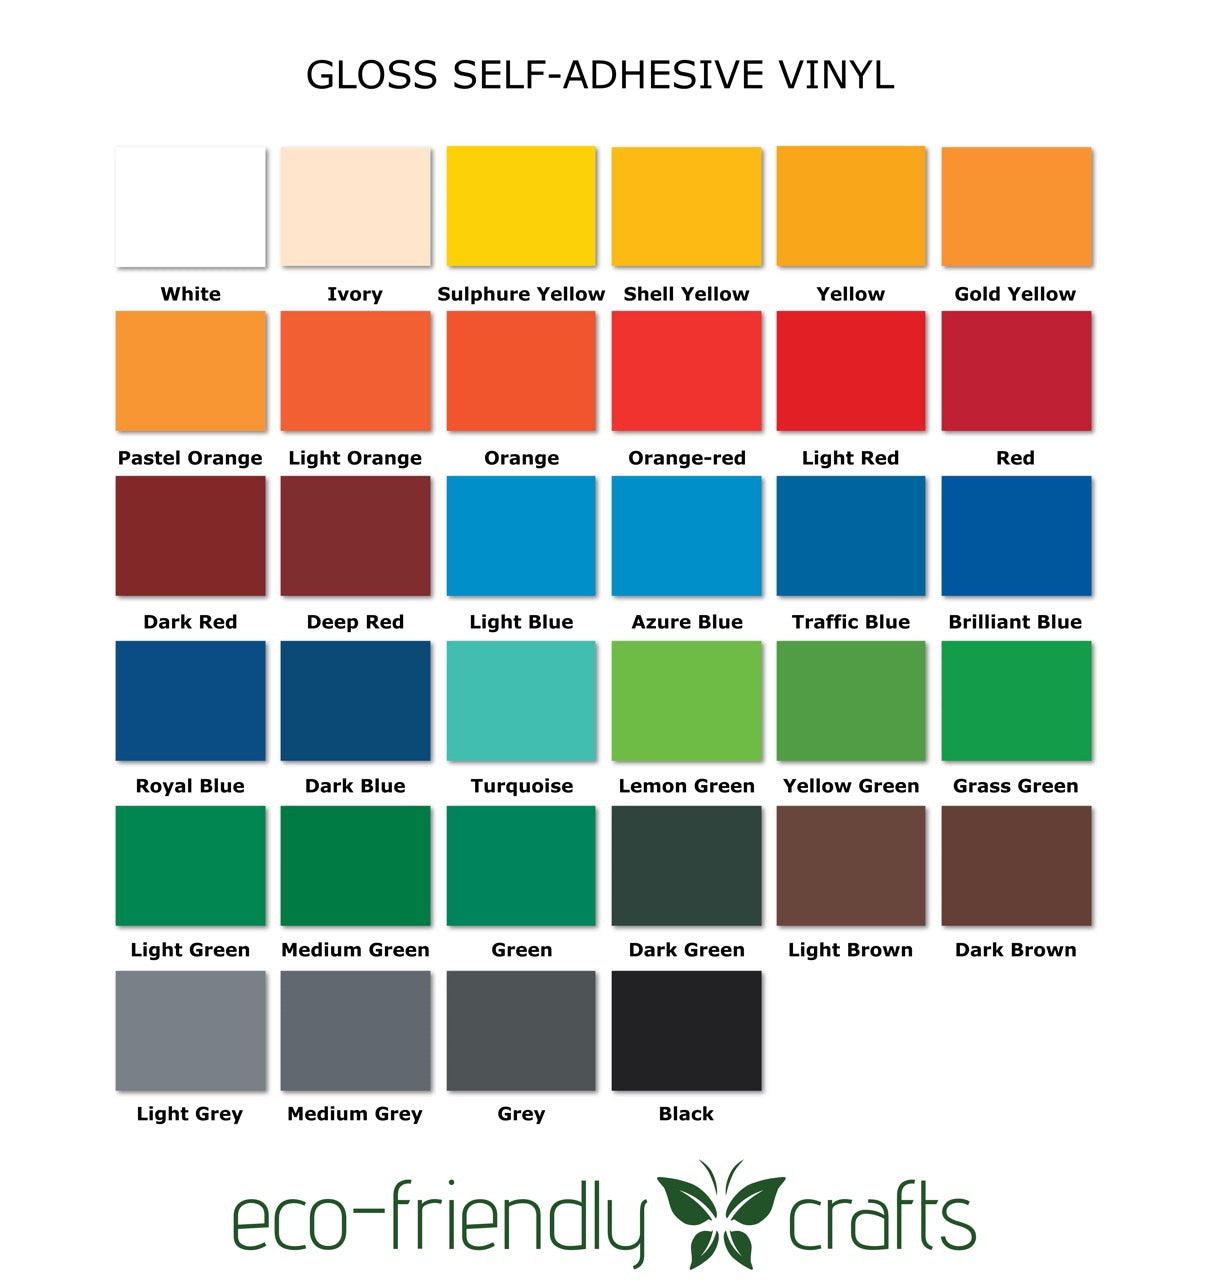 PVC-free Self Adhesive Vinyl - Permanent Gloss - 12 in x 24 in Roll